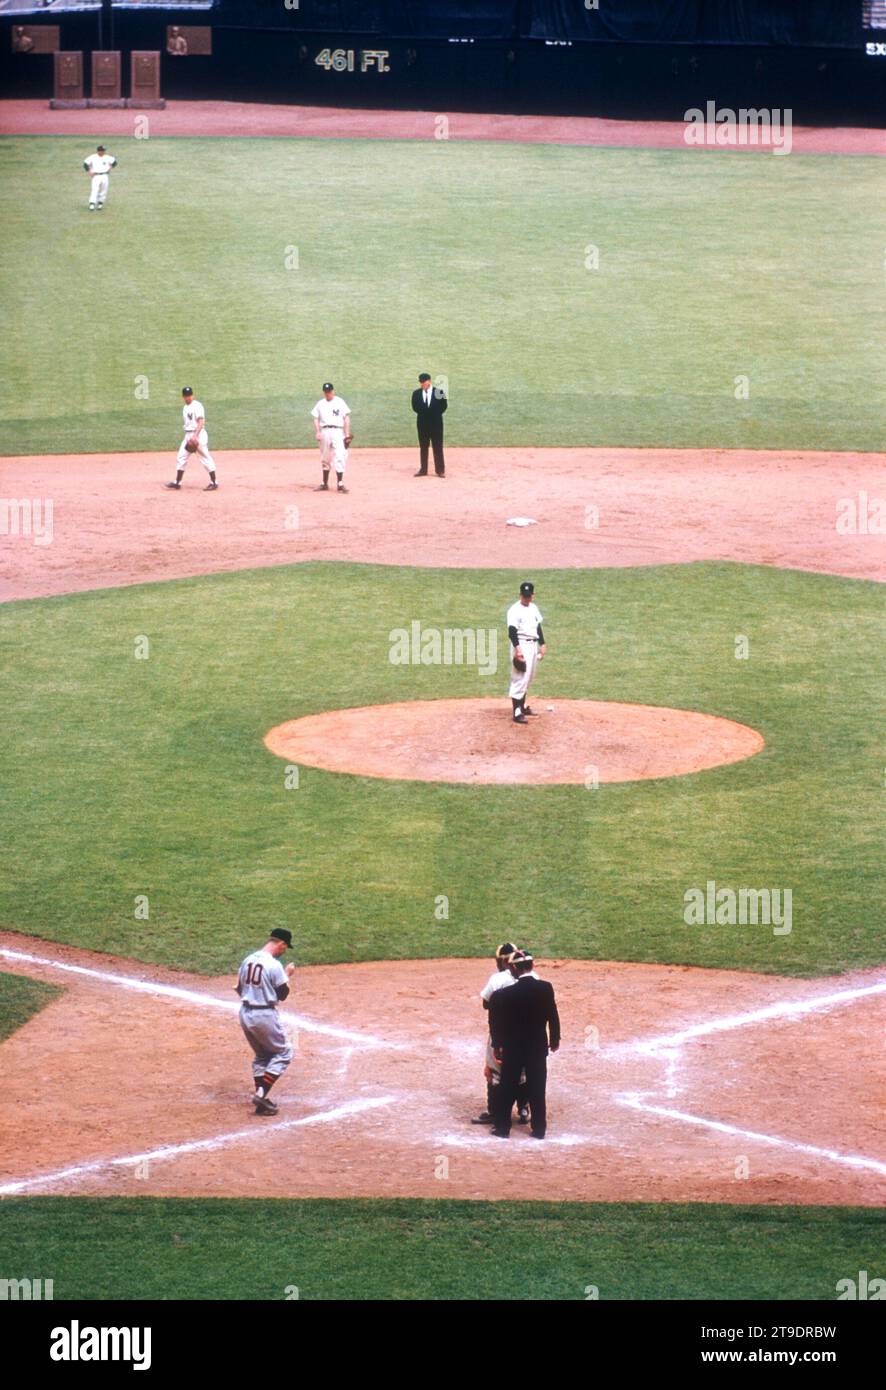 BRONX, NY - MAY 14:  Pitcher Whitey Ford #16 of the New York Yankees waits on the mound as Red Wilson #10 of the Detroit Tigers steps to the plate during an MLB game on May 14, 1955 at Yankee Stadium in the Bronx, New York.  (Photo by Hy Peskin) *** Local Caption *** Whitey Ford;Red Wilson Stock Photo